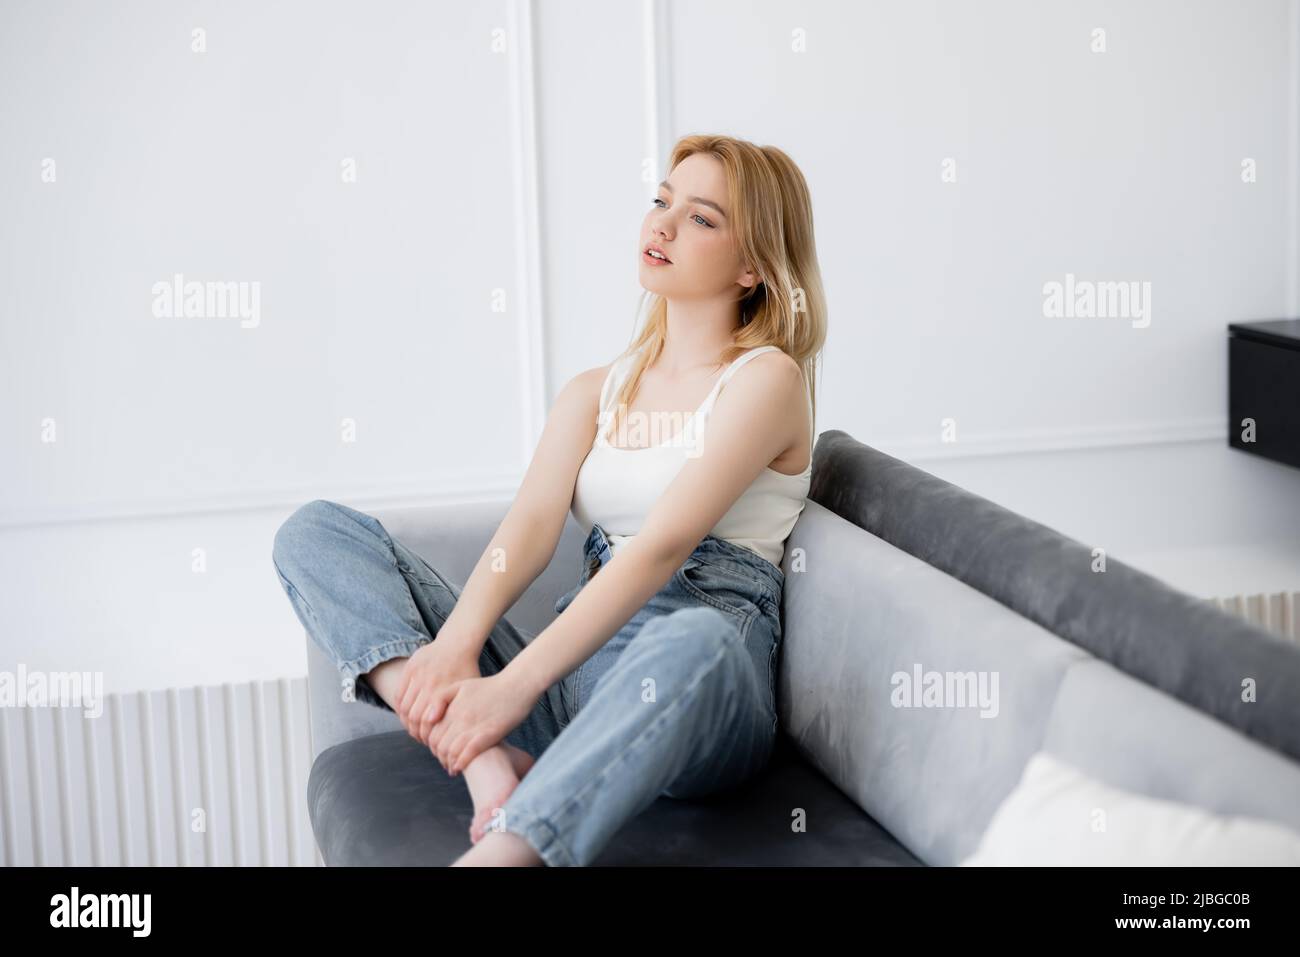 Young blonde woman looking away while sitting on couch Stock Photo